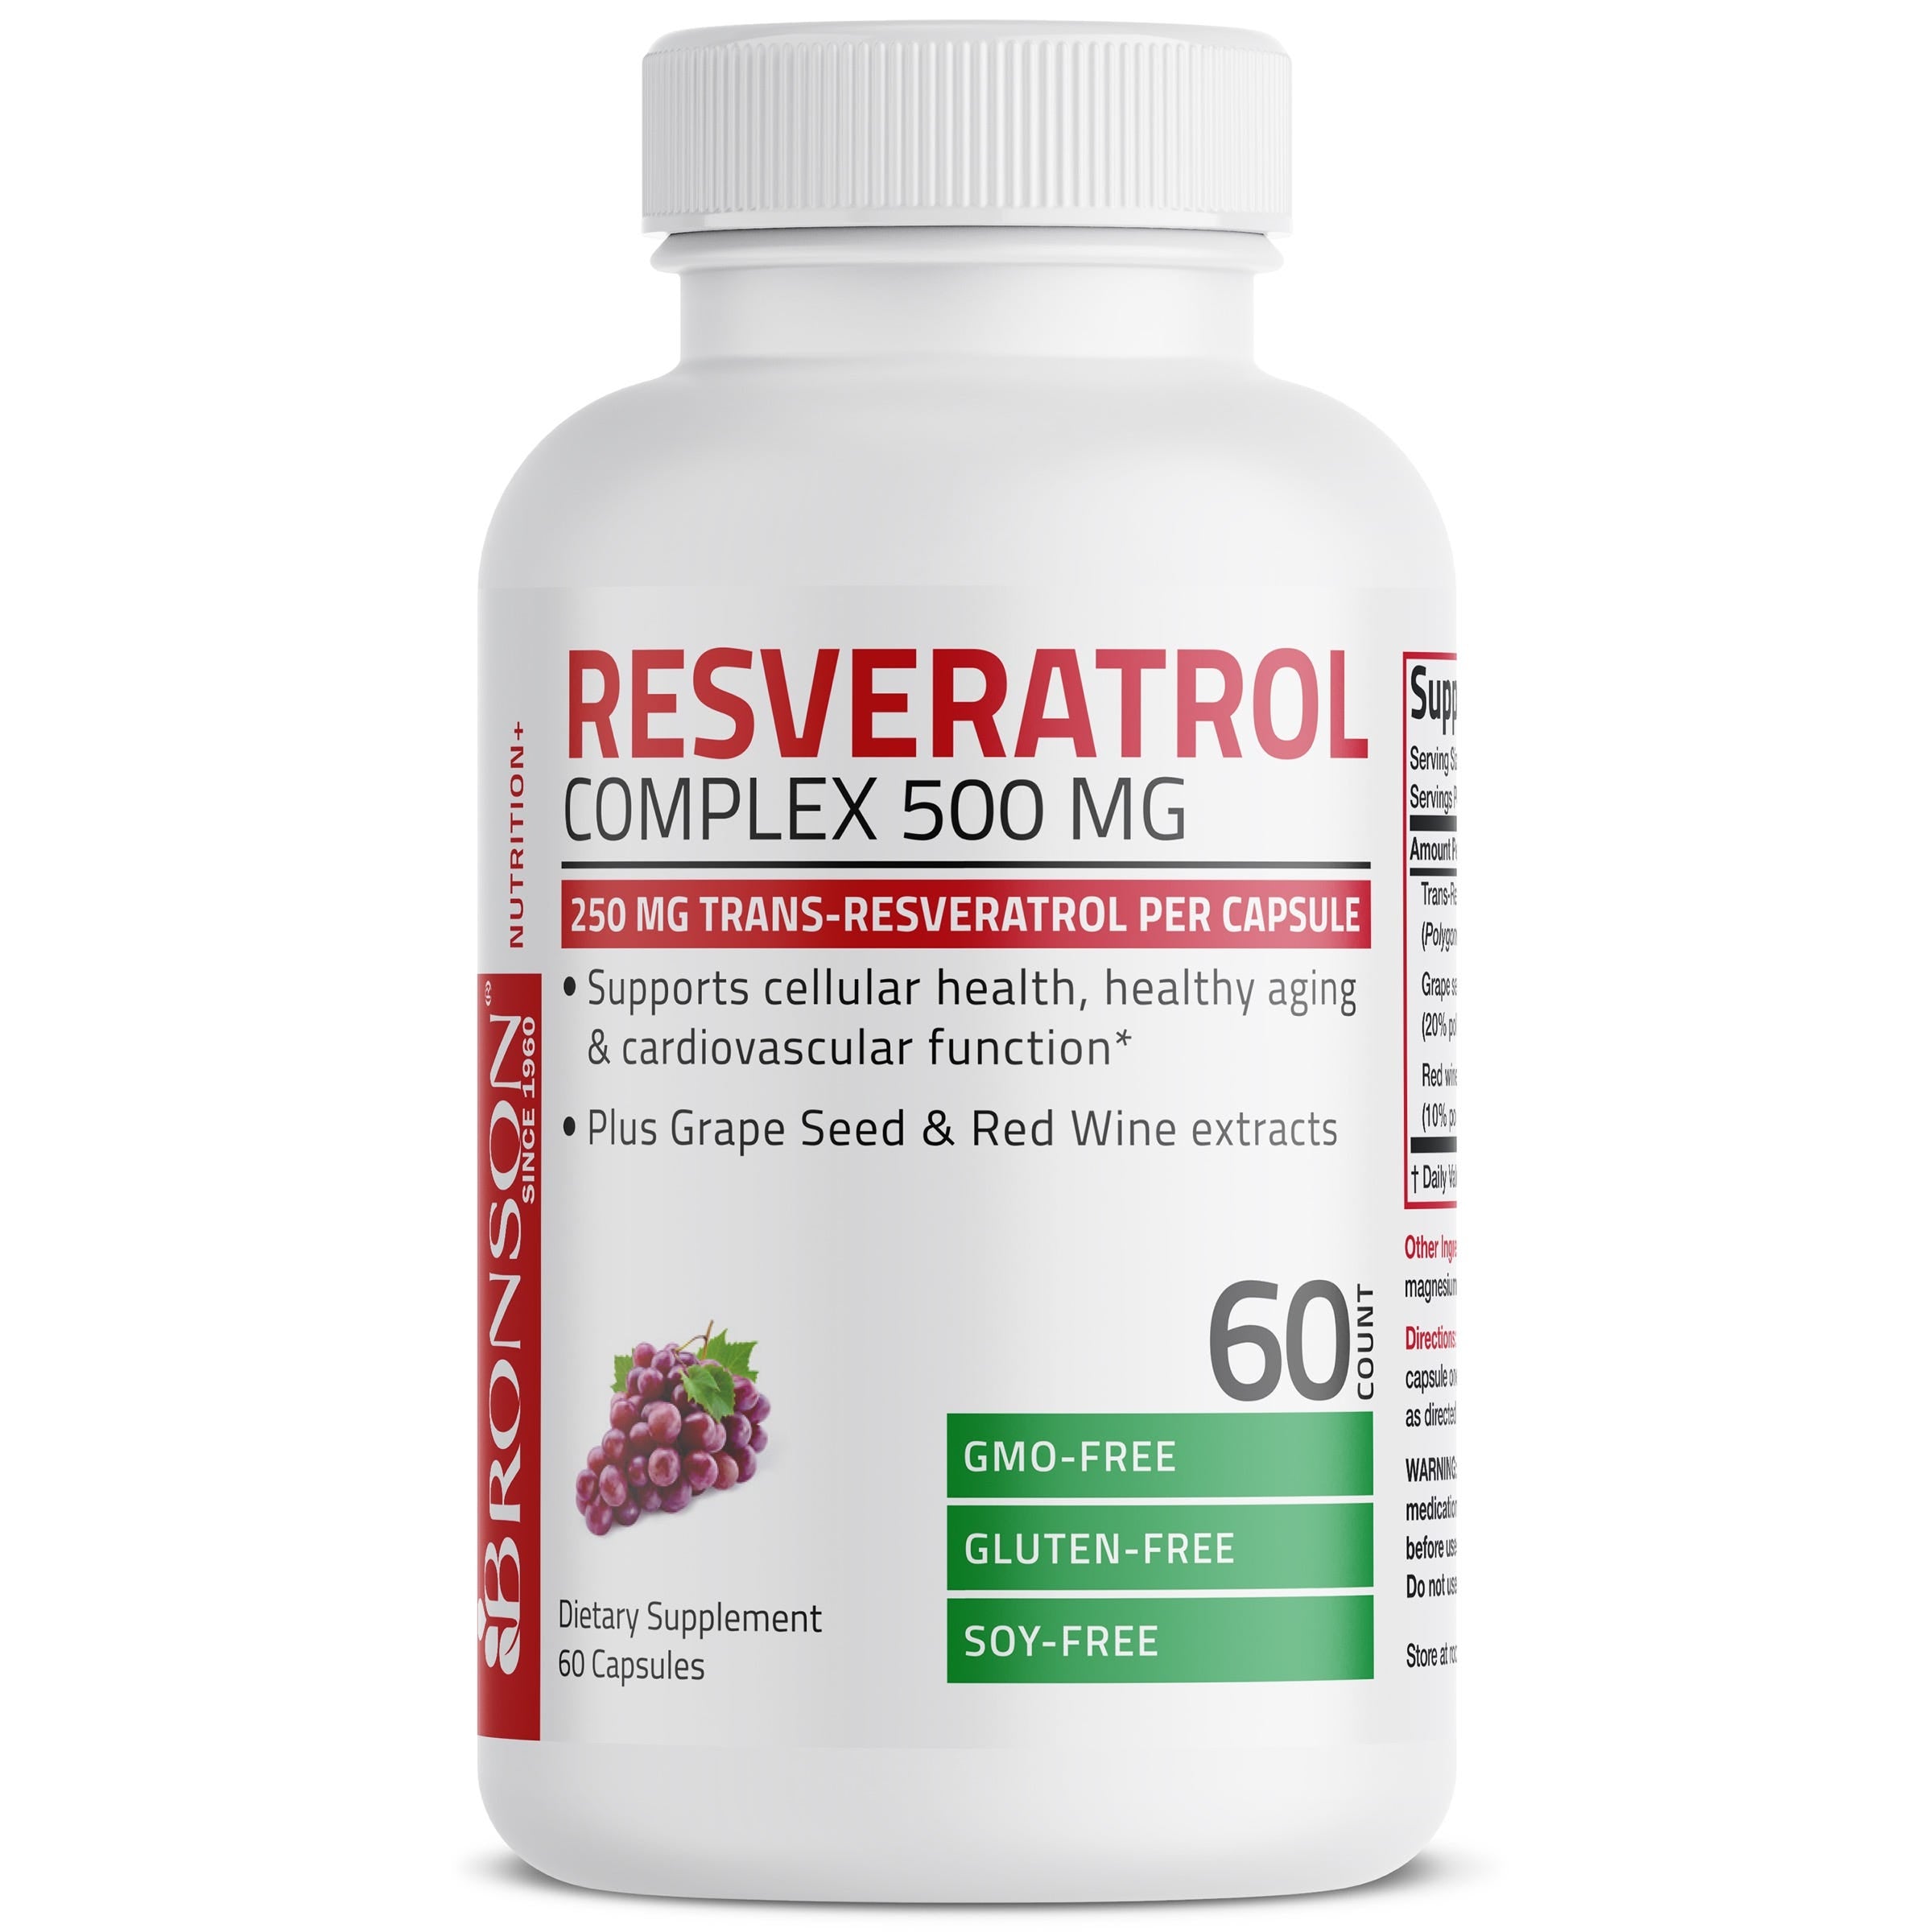 Resveratrol Complex - 500 mg view 1 of 4